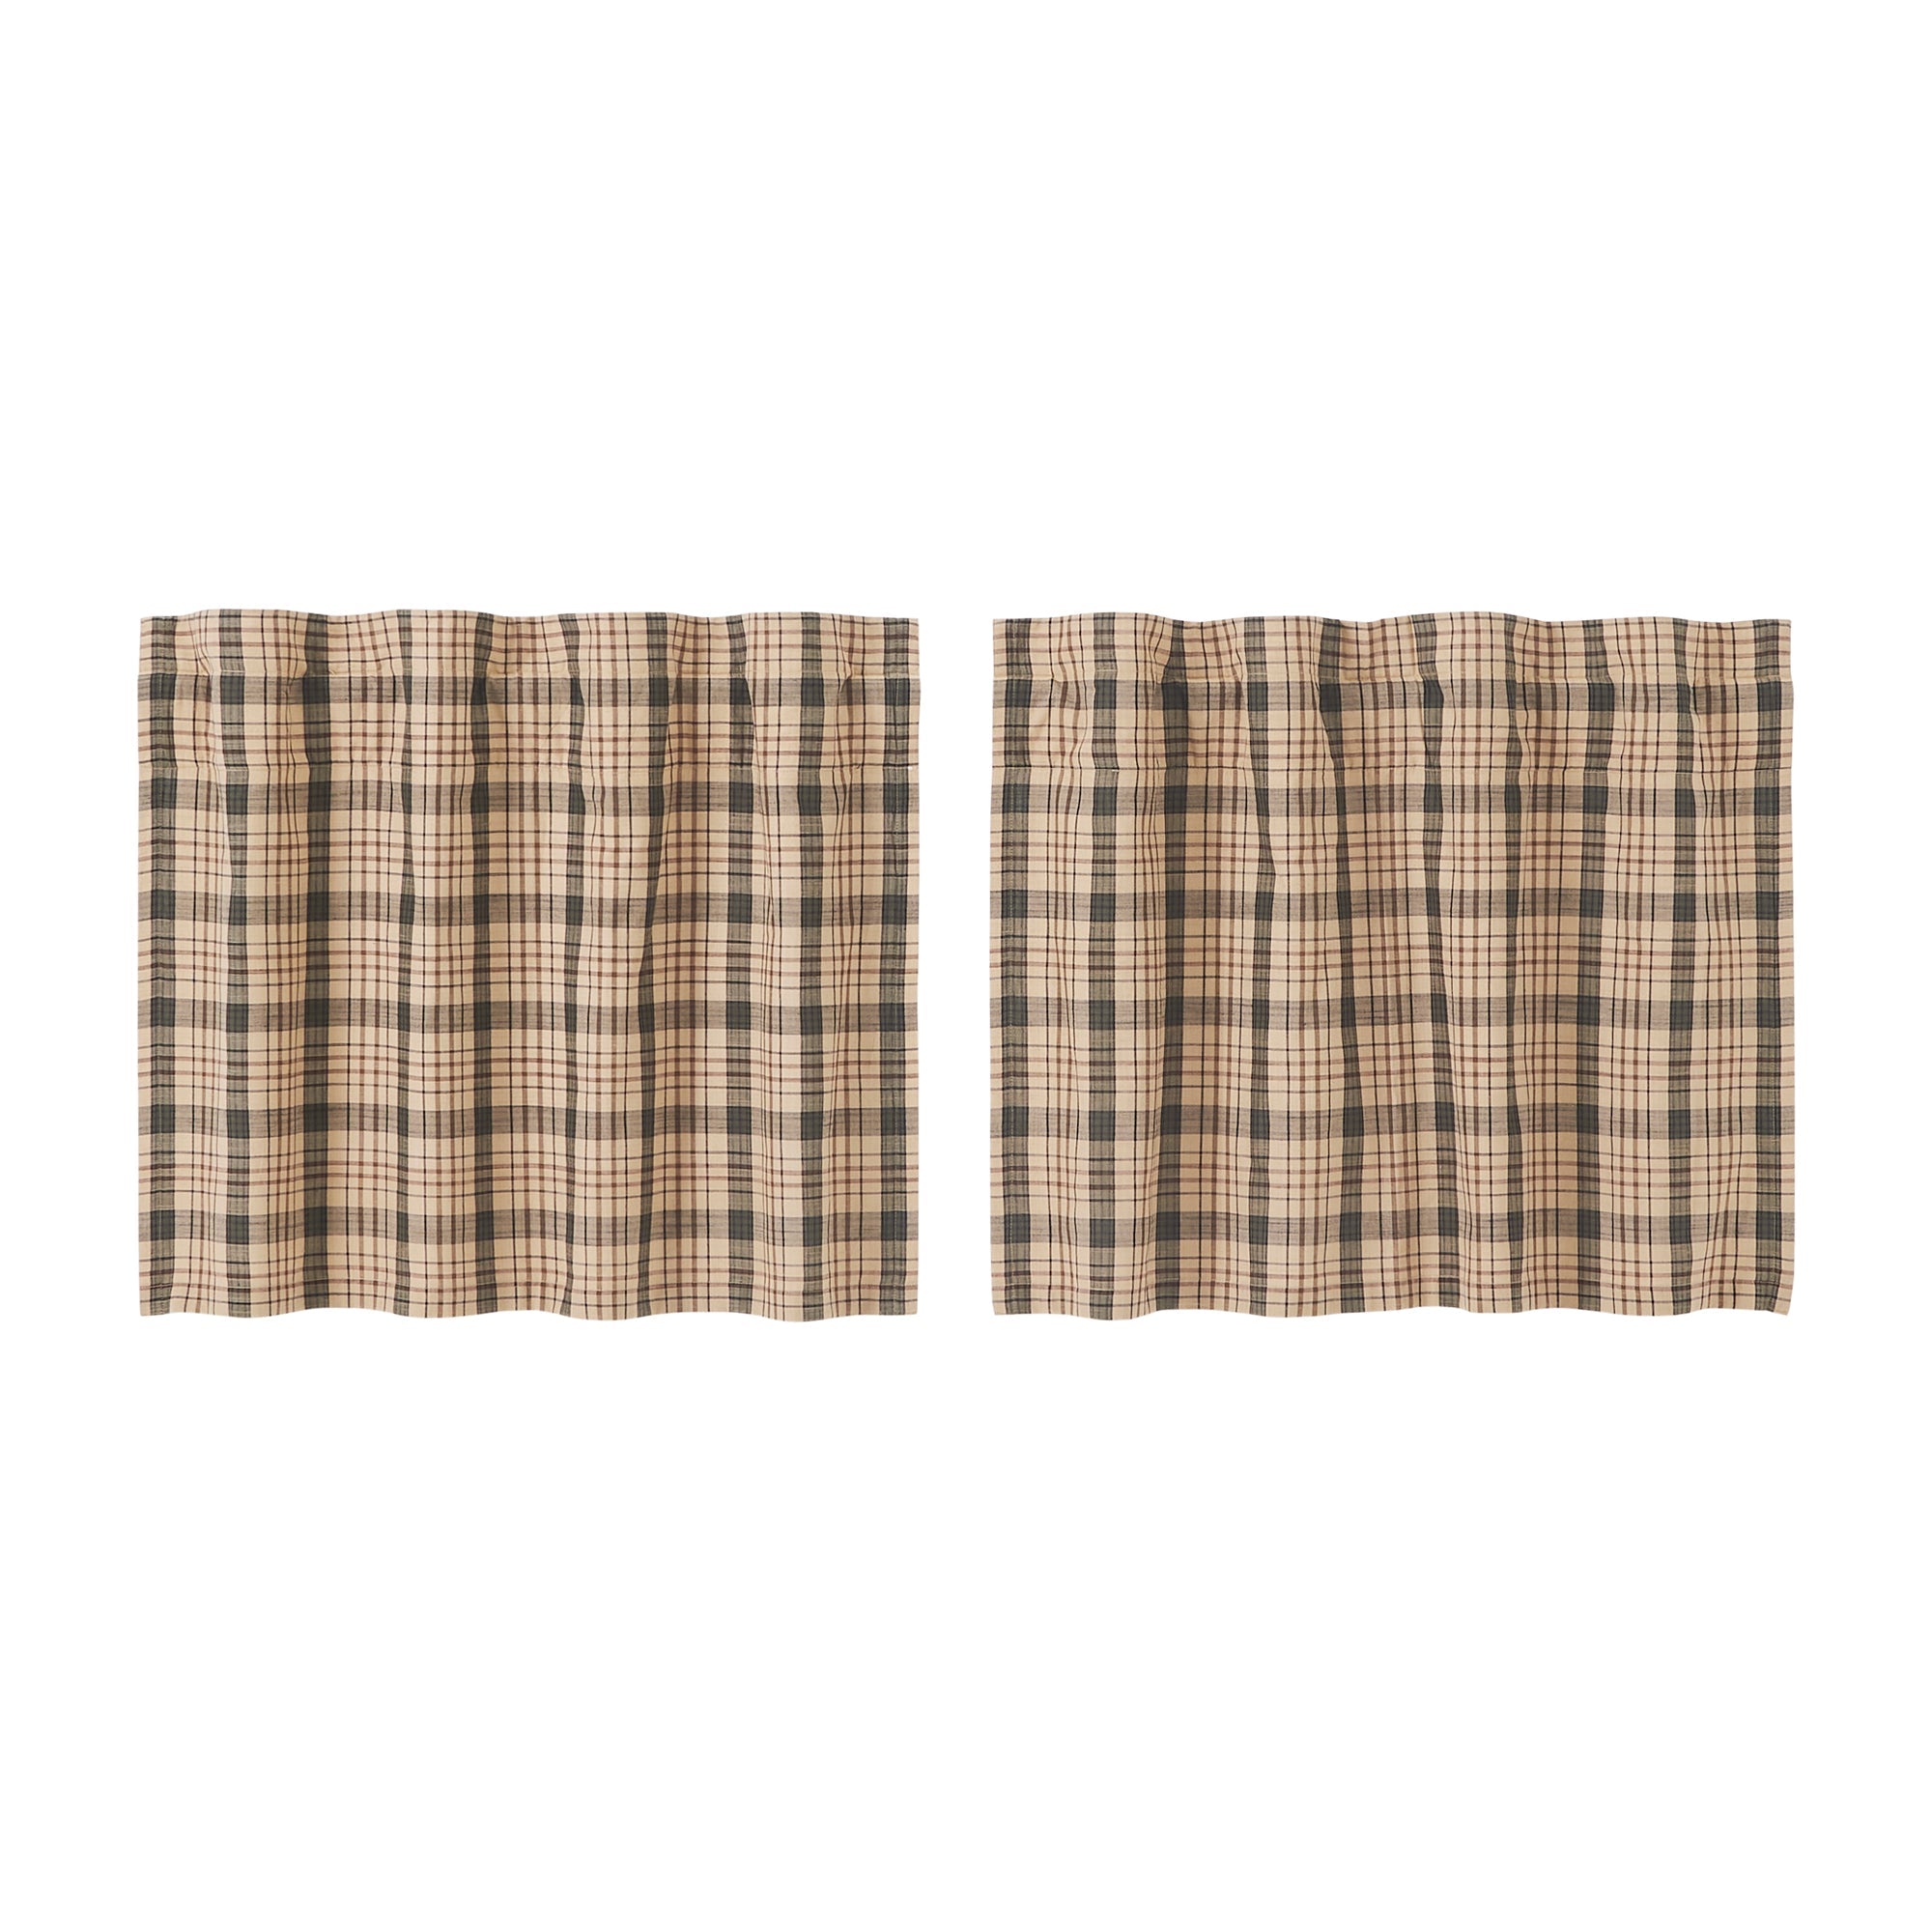 Cider Mill Plaid Tier Set of 2 L24xW36 VHC Brands